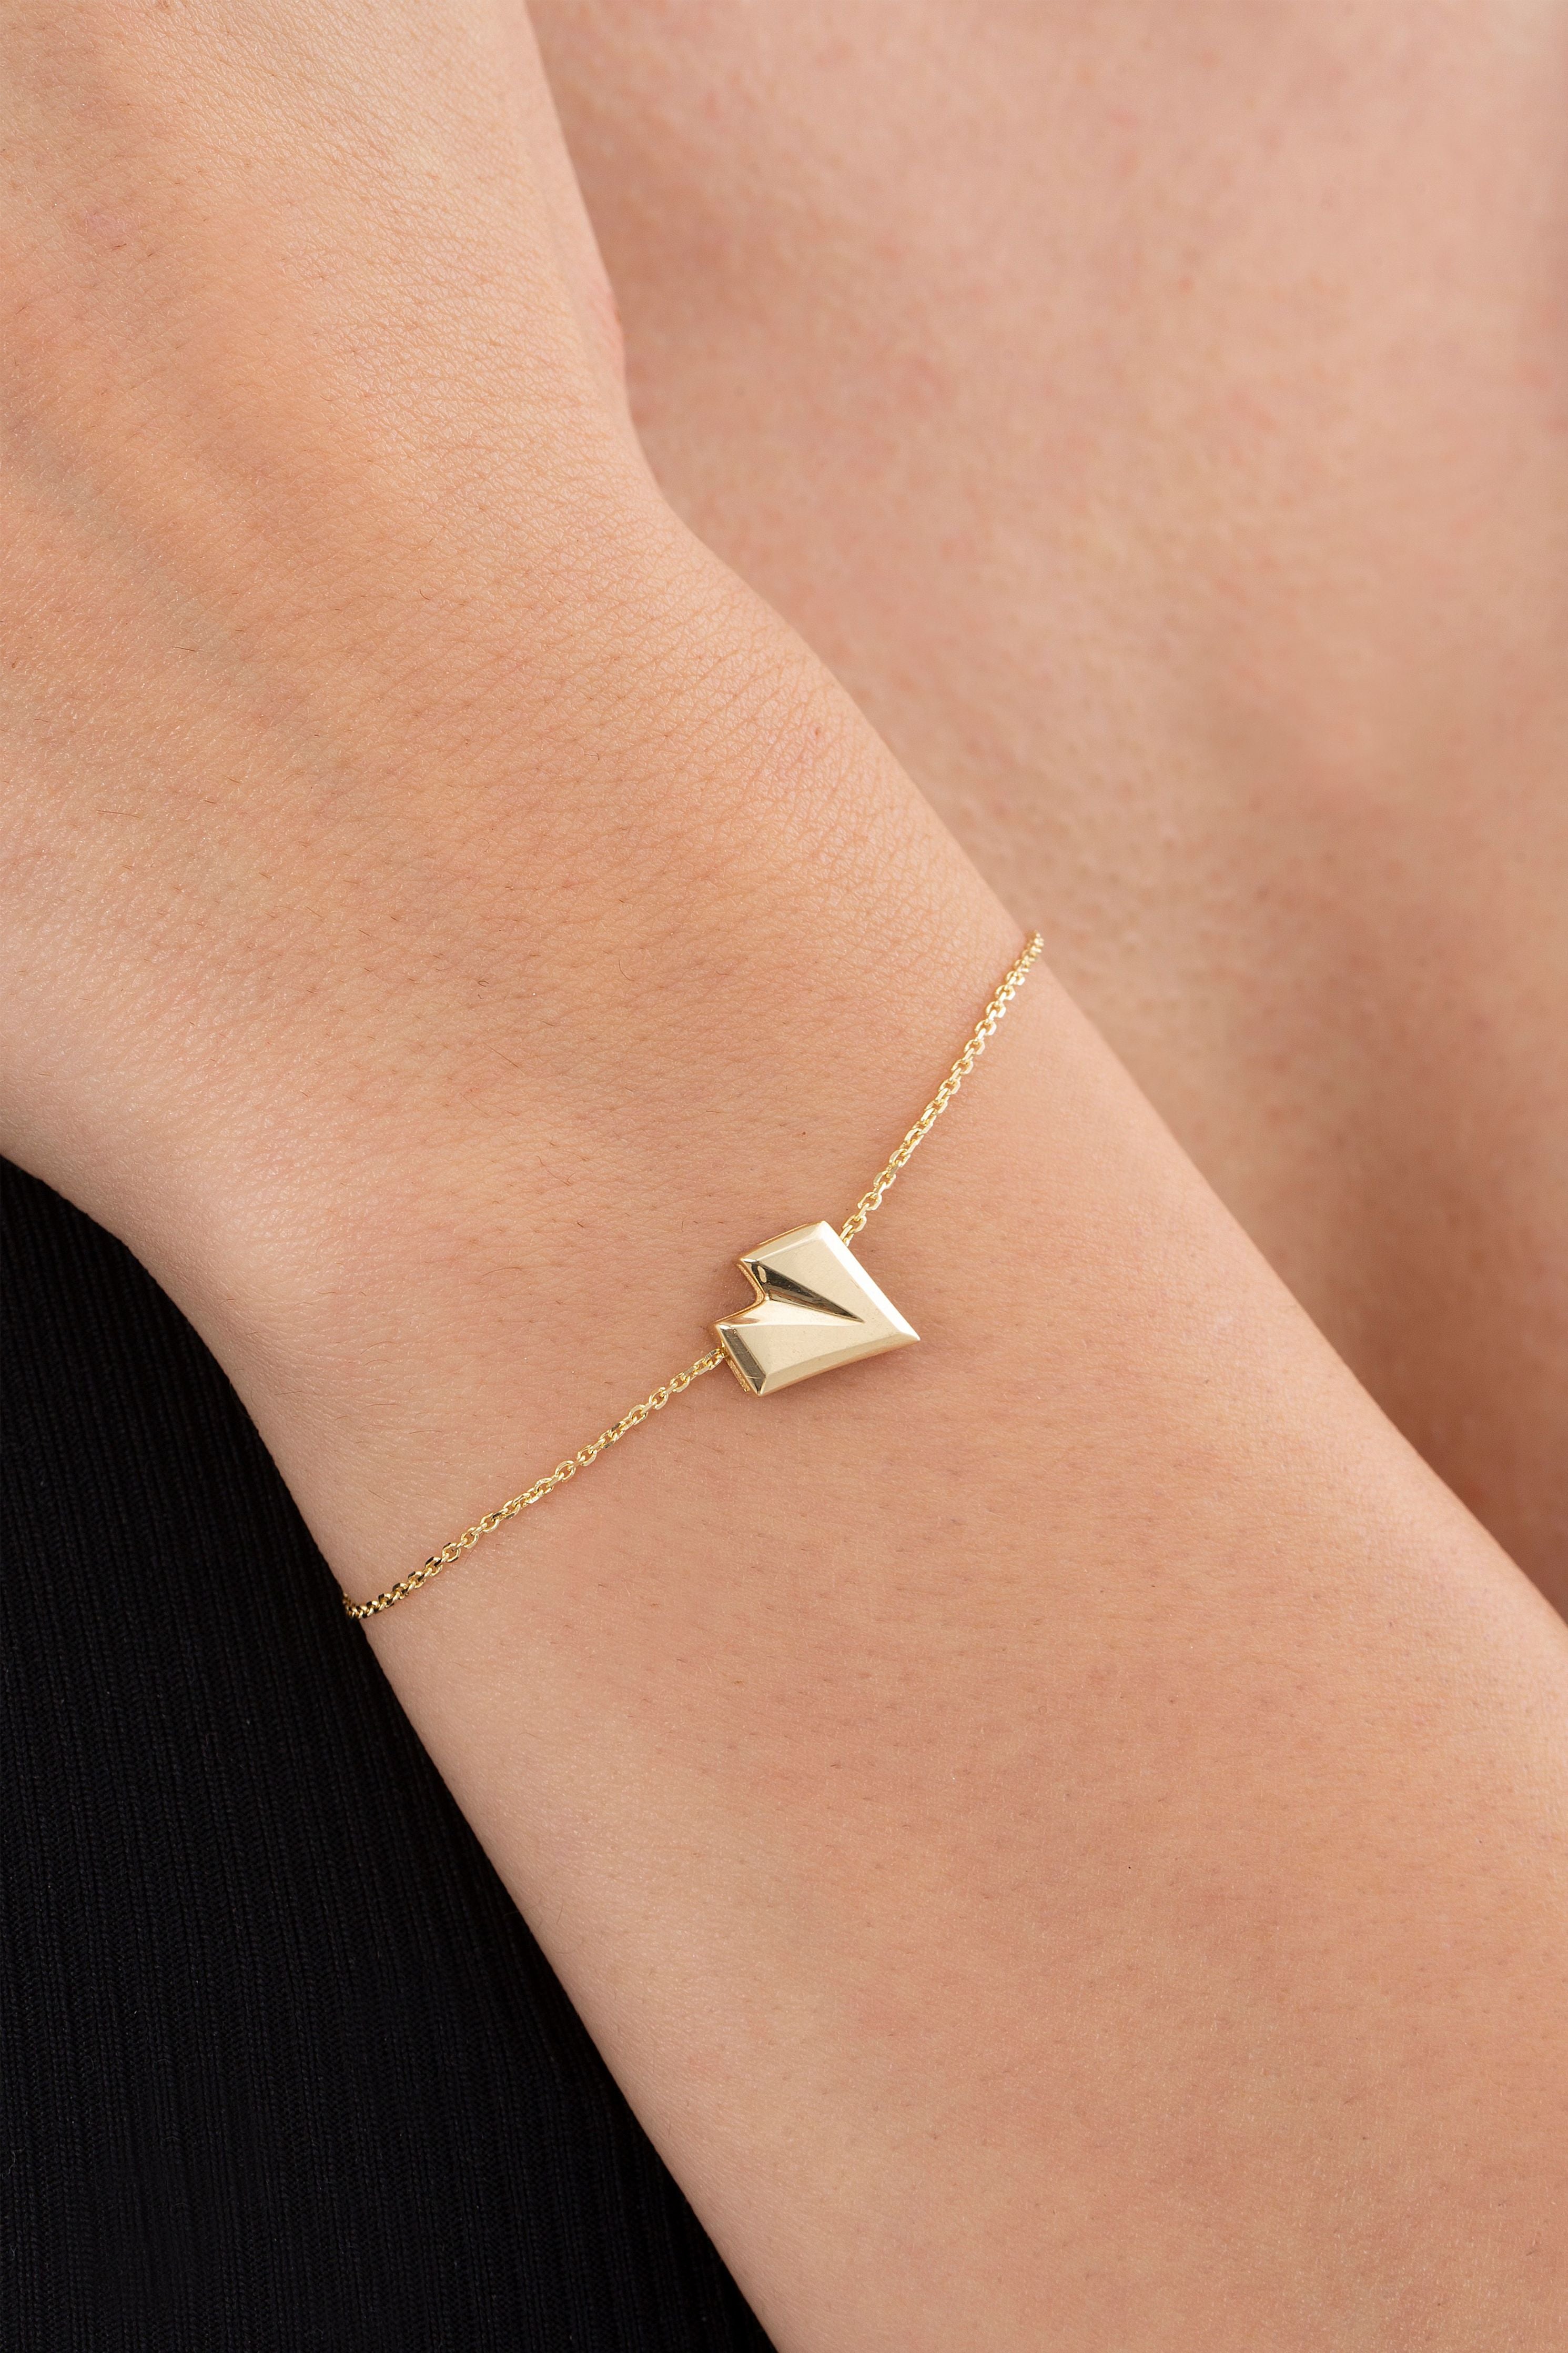 Origami Love Bracelet in Yellow Gold - Her Story Shop